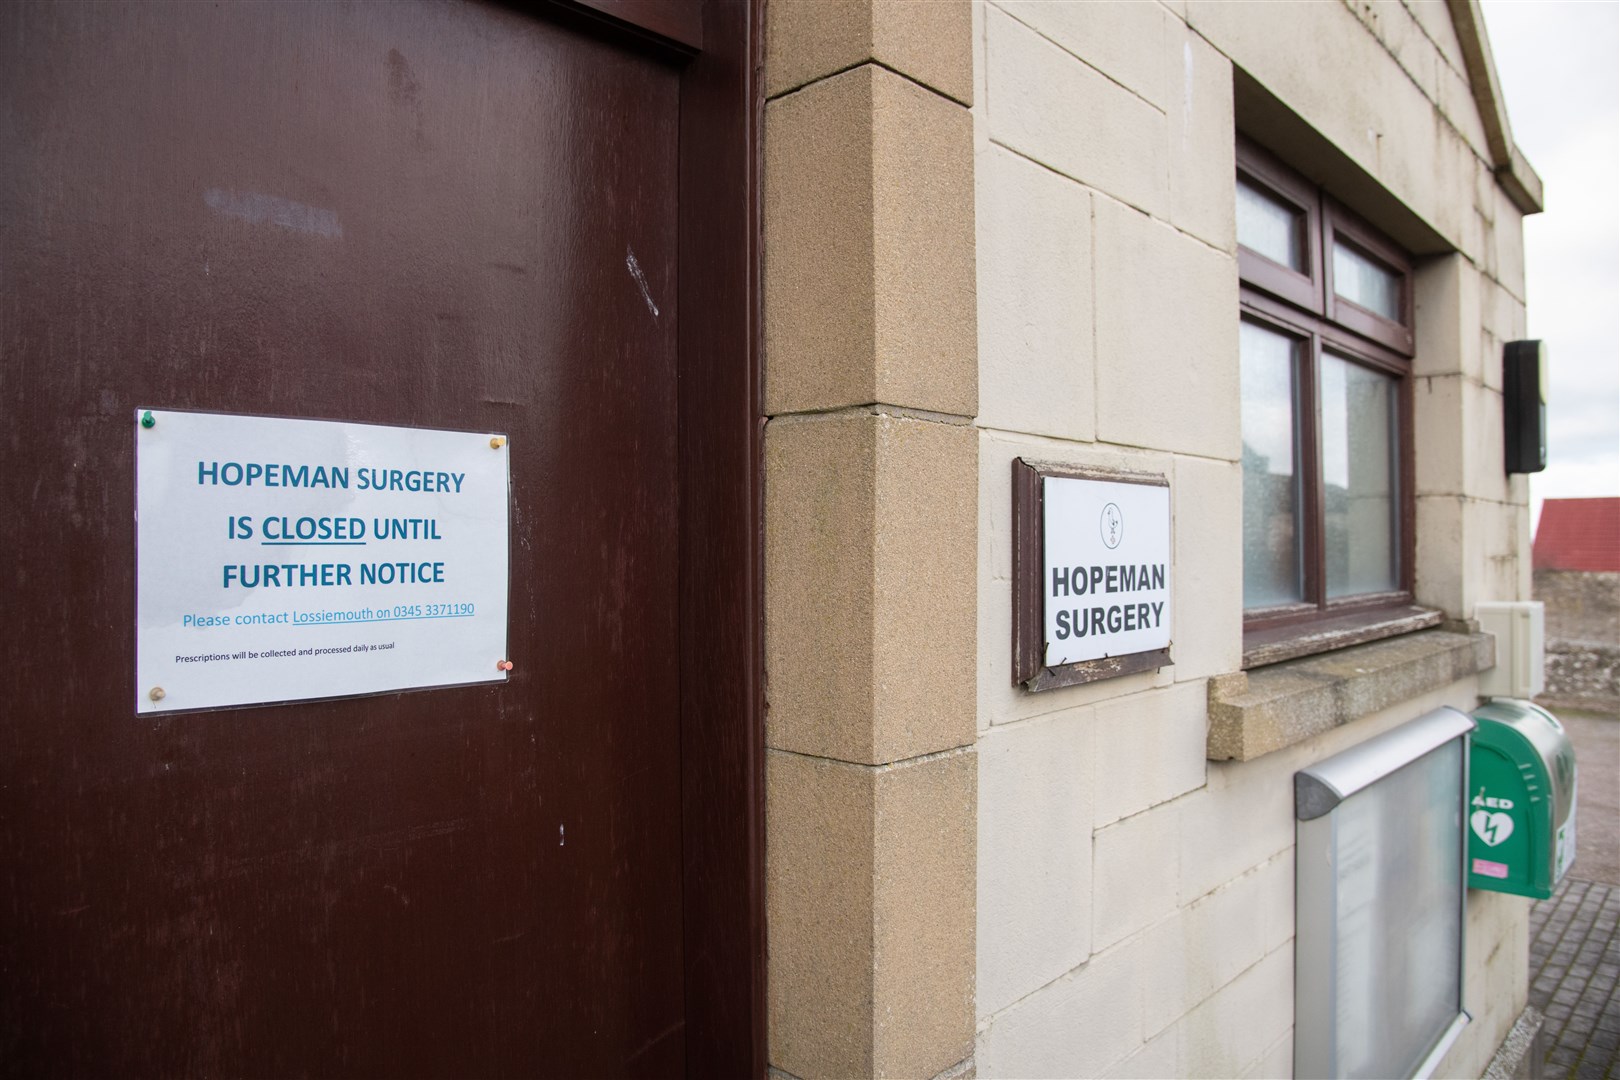 Hopeman Doctors Surgery has been closed since the beginning of the Covid pandemic in March 2020. Picture: Daniel Forsyth